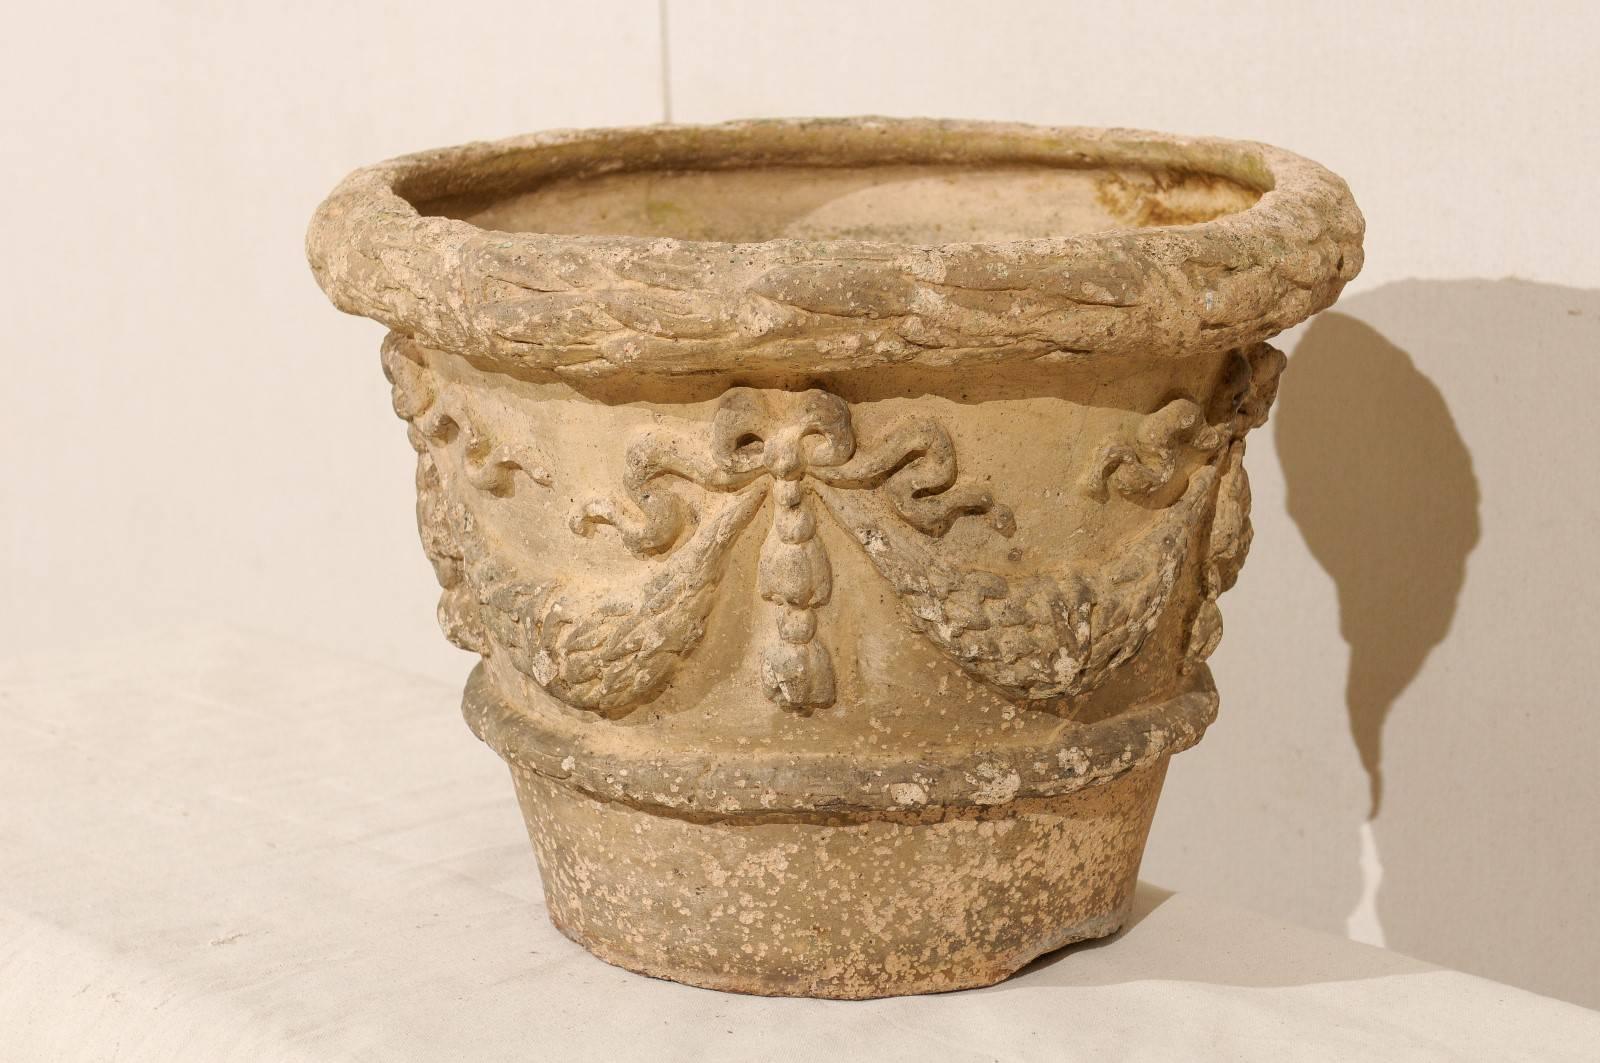 A French terracotta garden pot. This French pot from the 20th century has a subtle conical shape and is adorned with a repeating bow and swag motif. This pot has an overall beige-cream color. There is really nice patina and age throughout. This